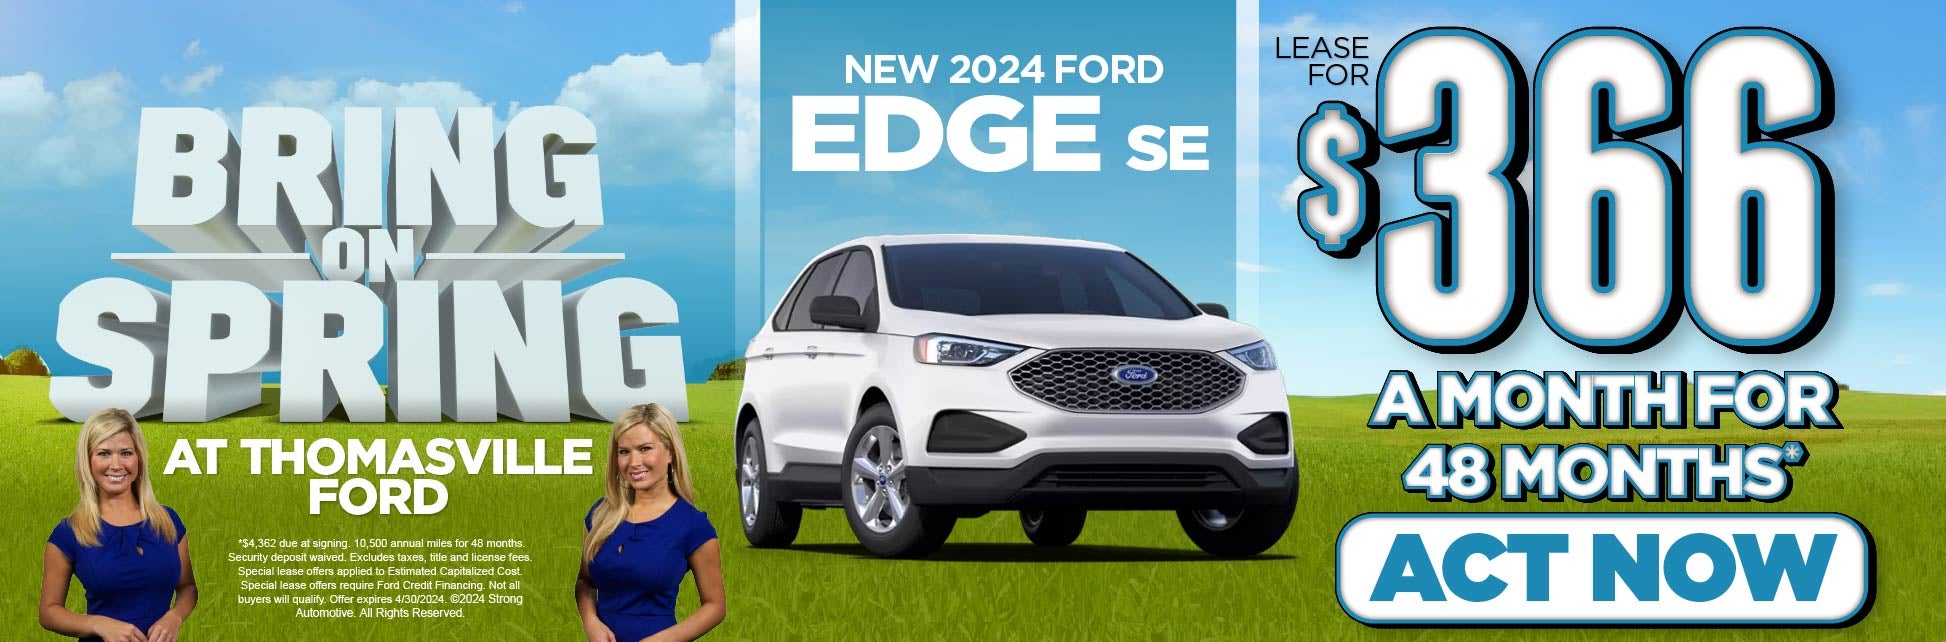 New 2024 Ford Edge SE - Lease $366/mo for 48mos Act Now